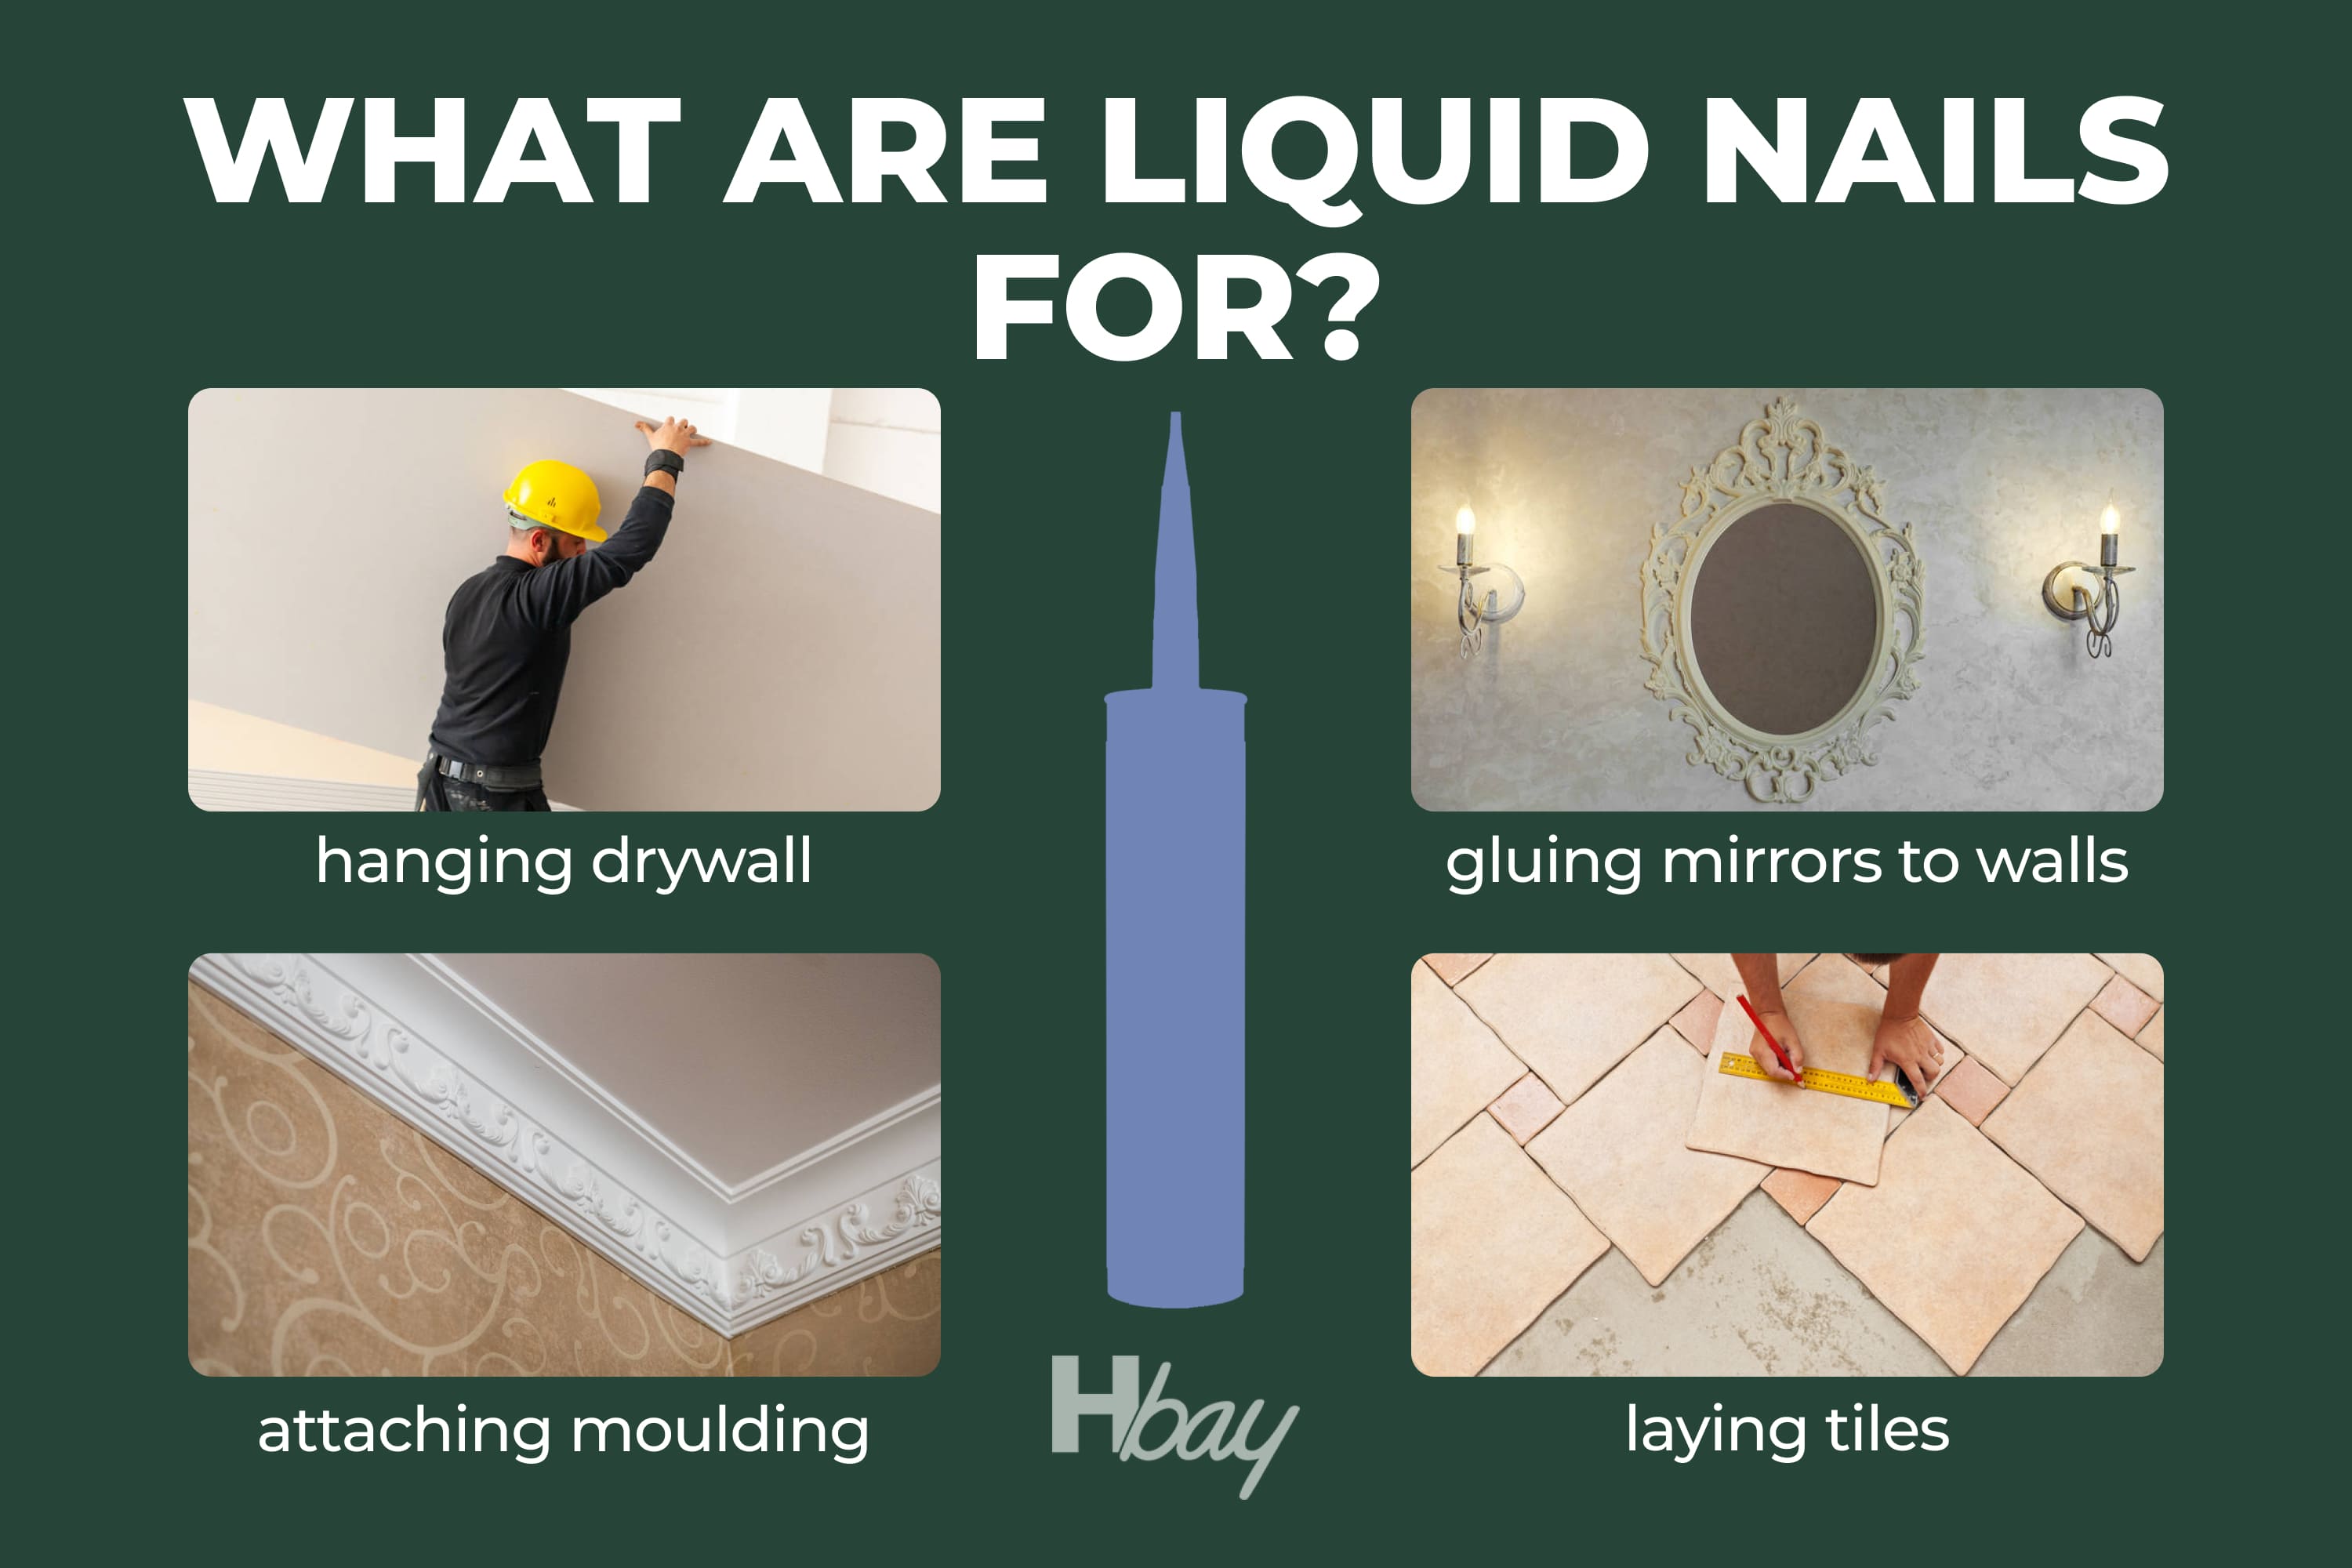 What are liquid nails for